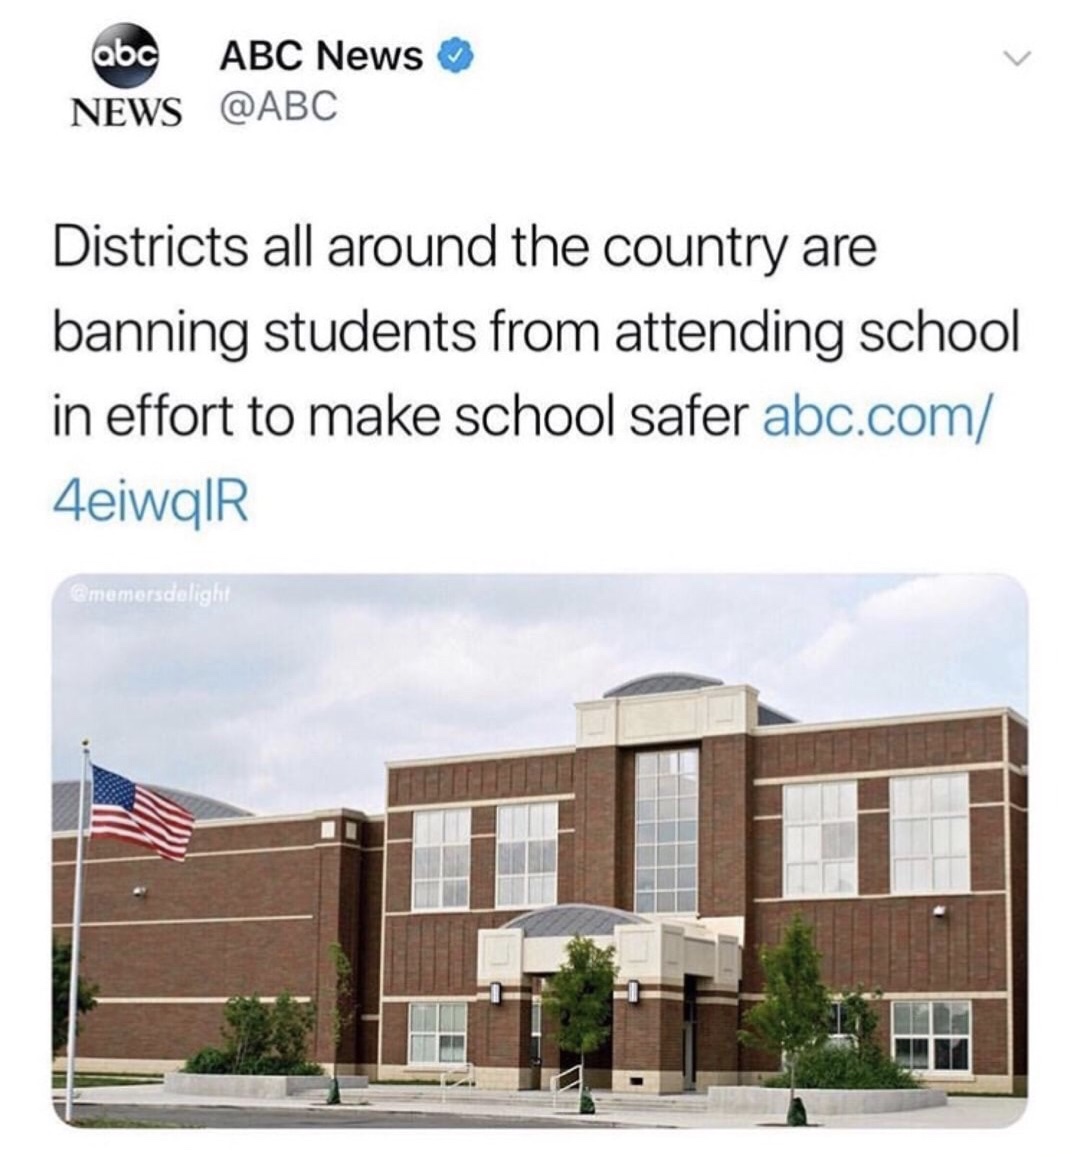 school building - abc Abc News News Districts all around the country are banning students from attending school in effort to make school safer abc.com 4eiwqIR